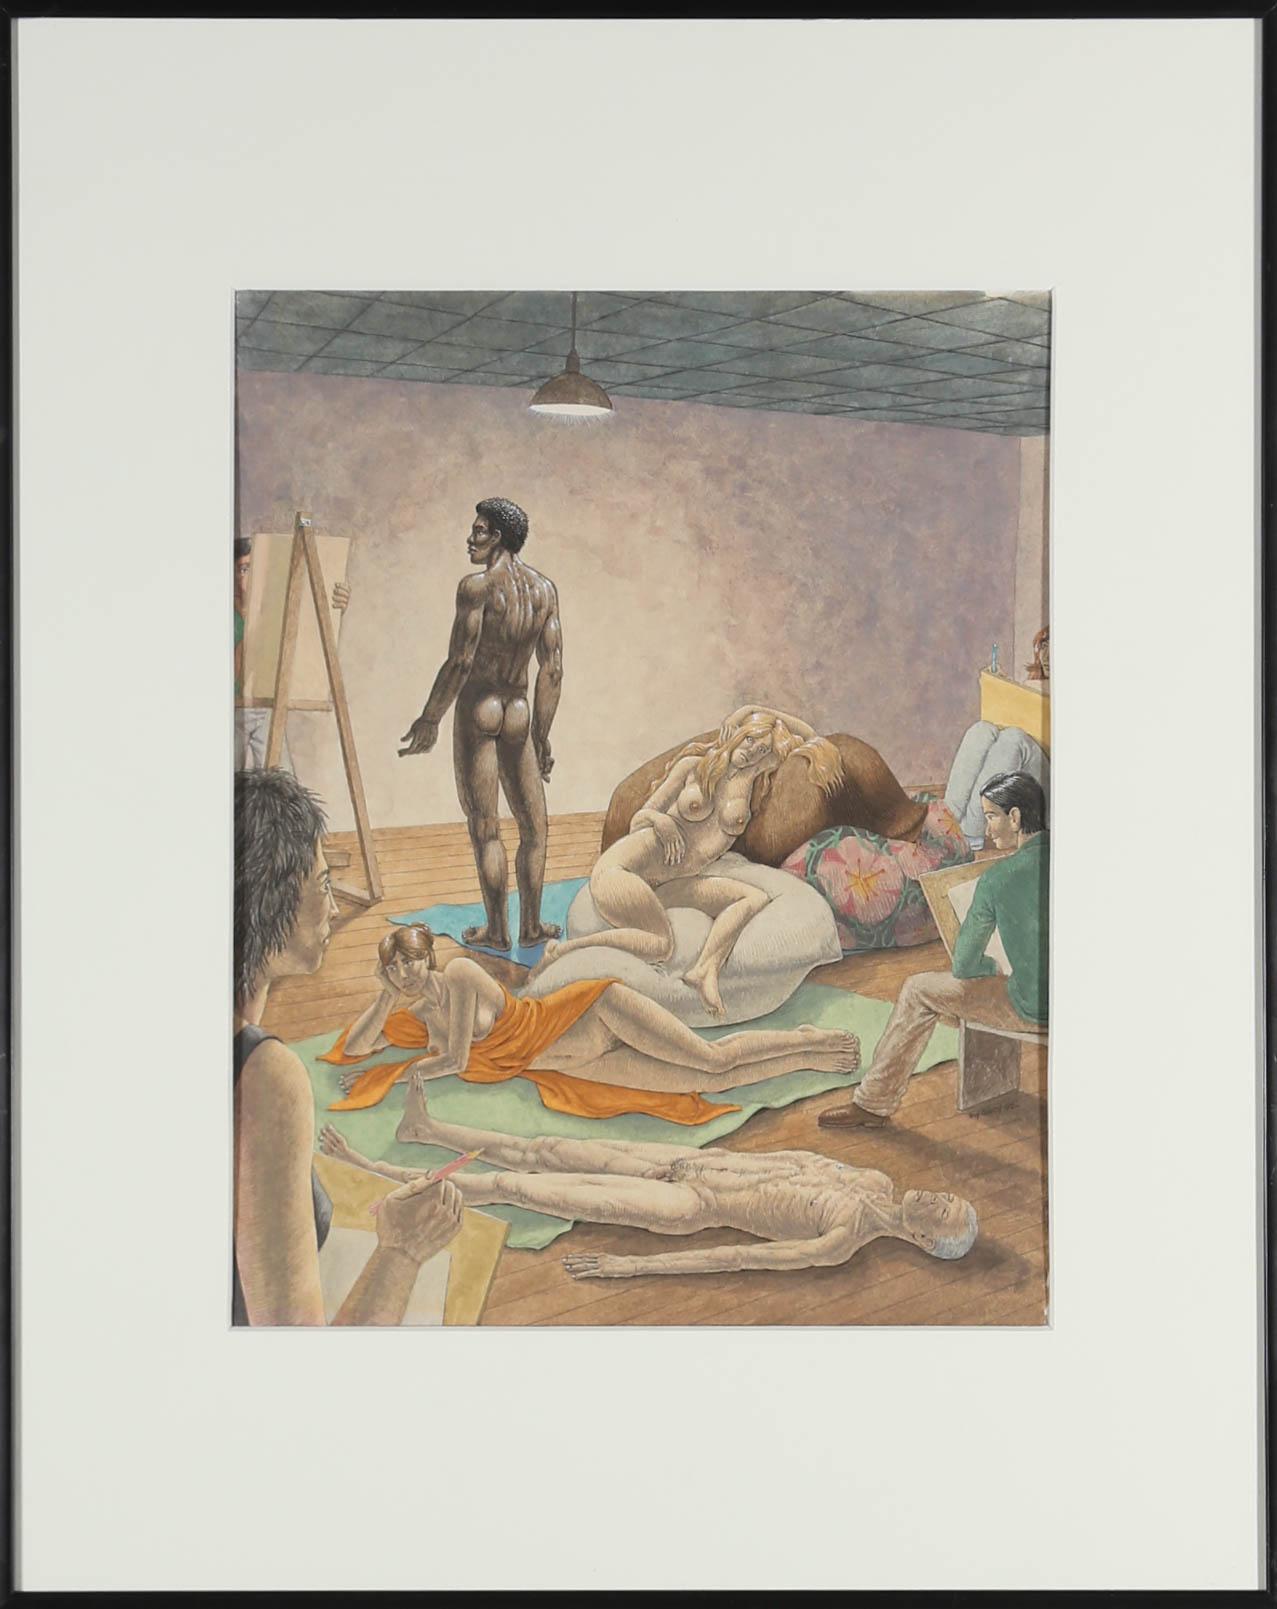 A striking scene depicting a life drawing class with nude models posing for artists. The artist captures the scene in a highly stylised manner giving all of the figures a great sense of character. Signed and dated to the lower right. Presented in a